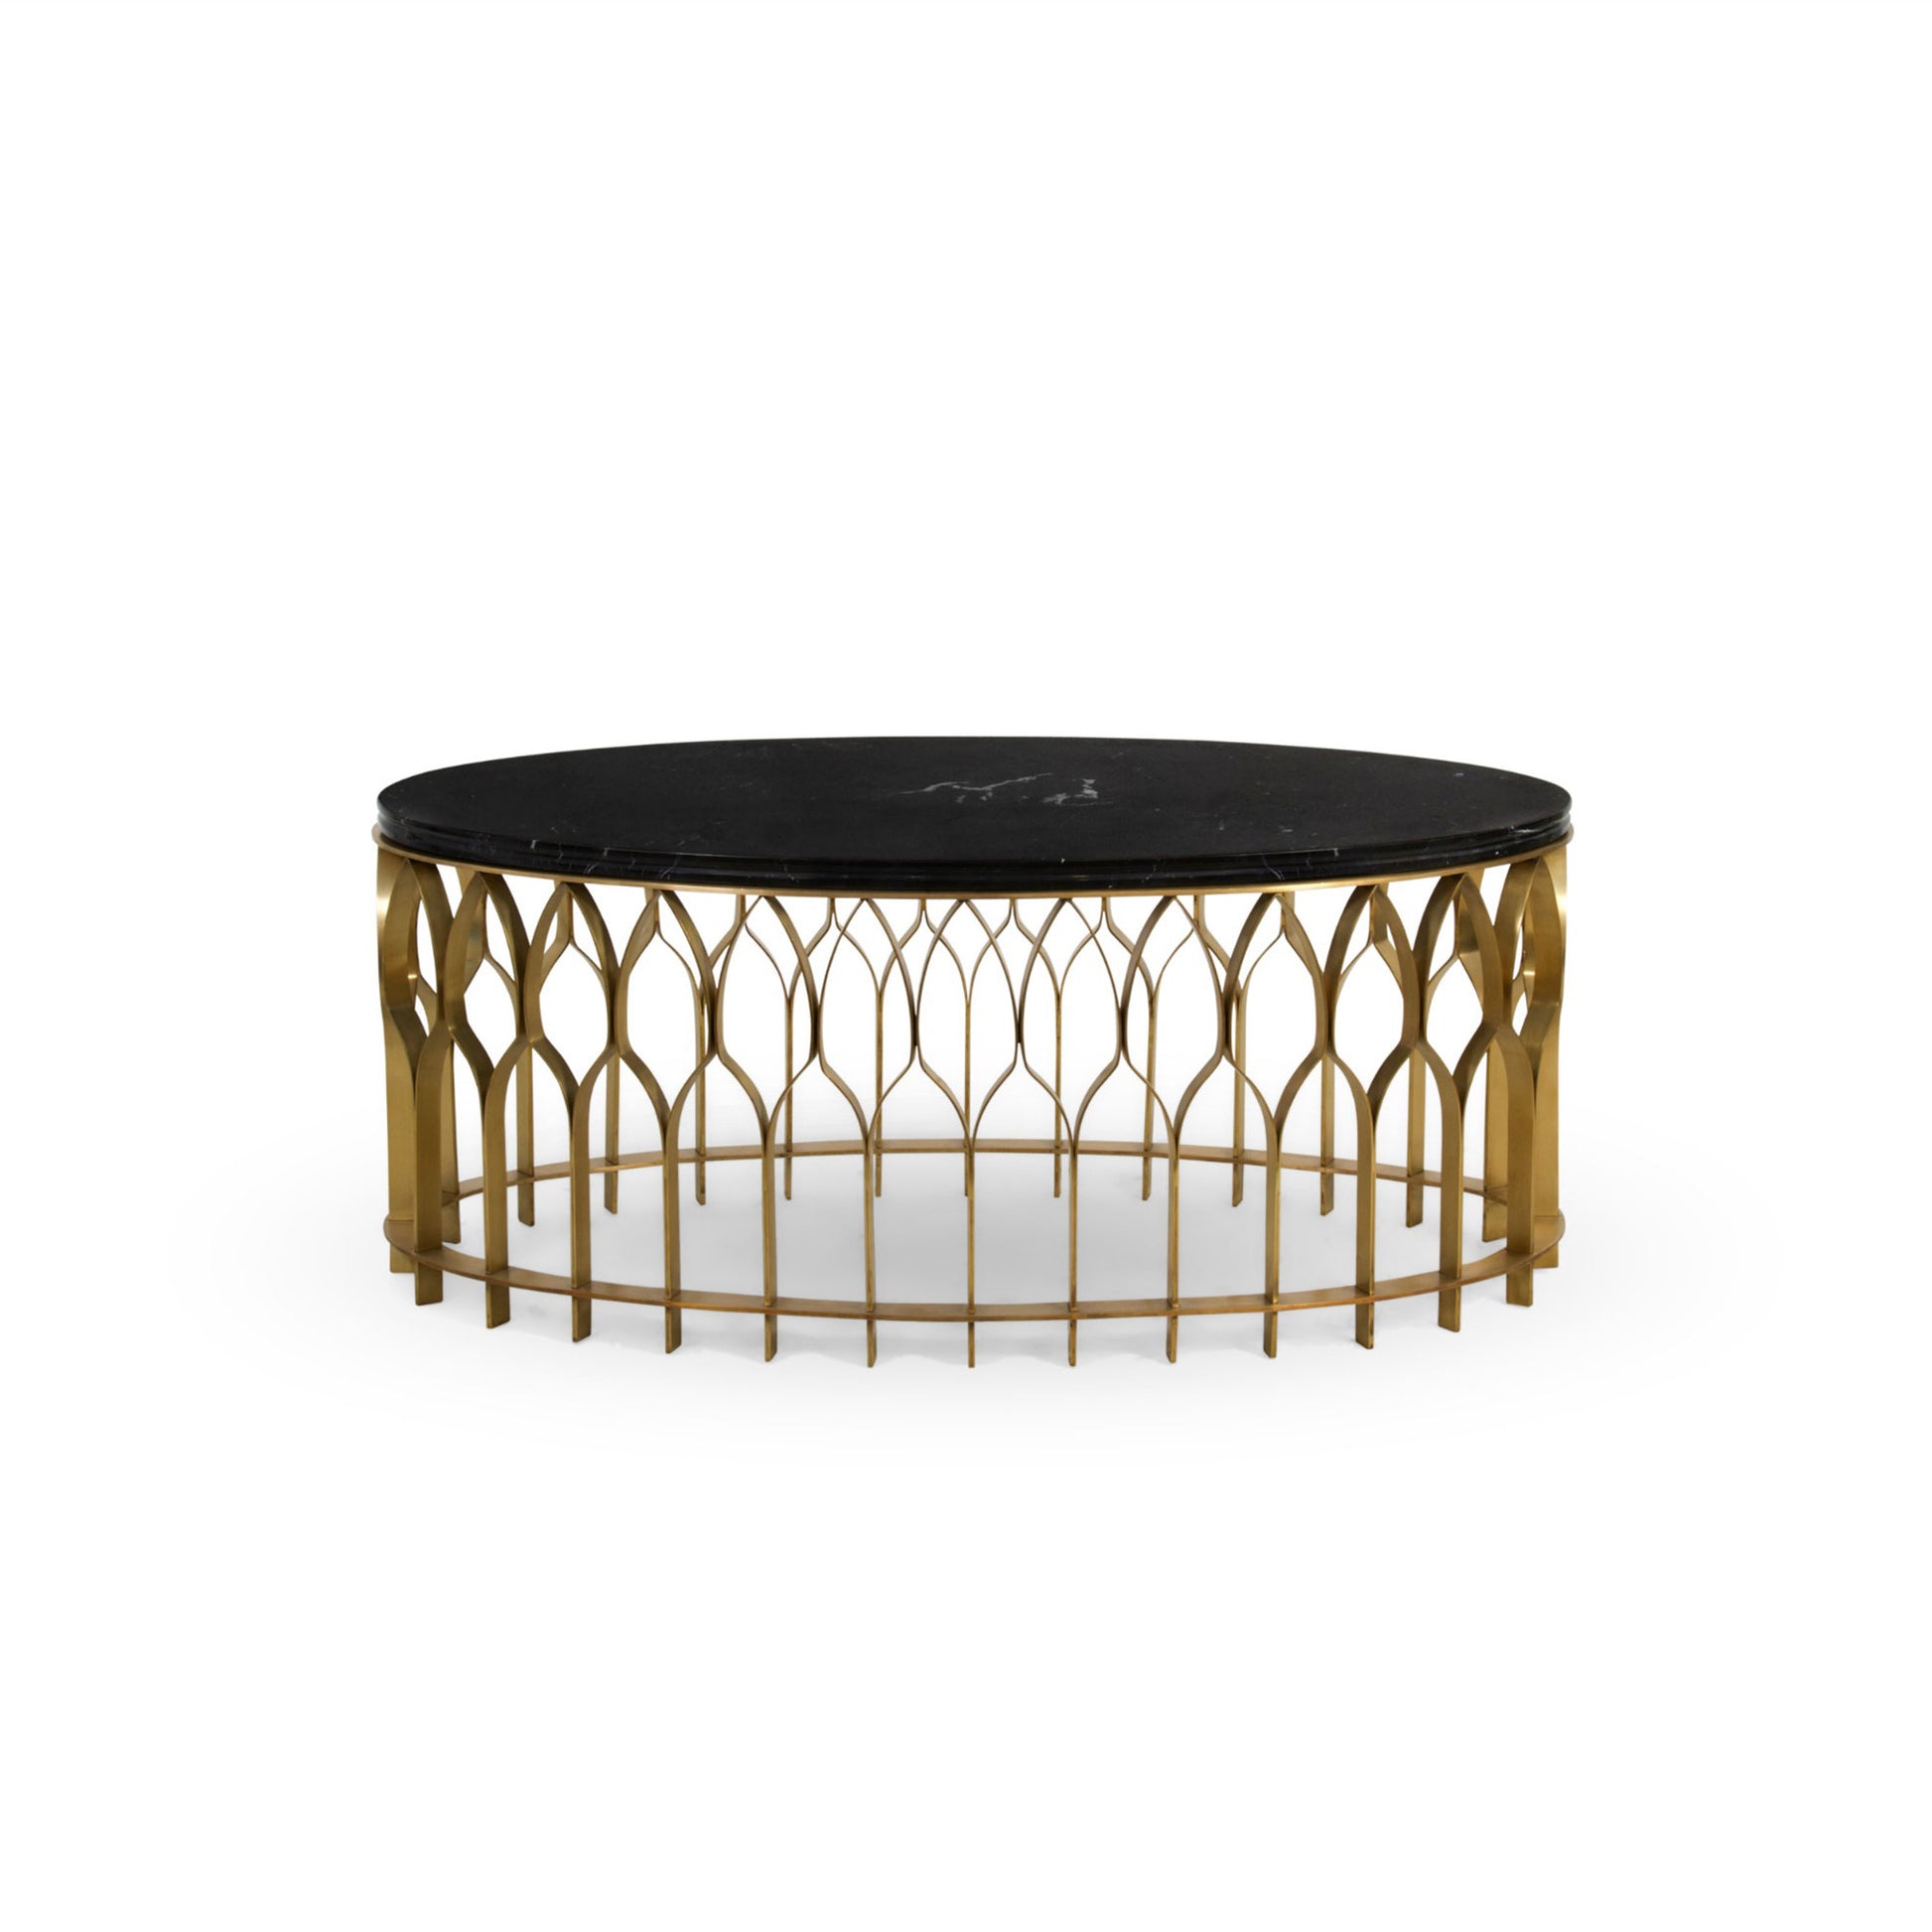 Black and Gold Mecca II Center Table